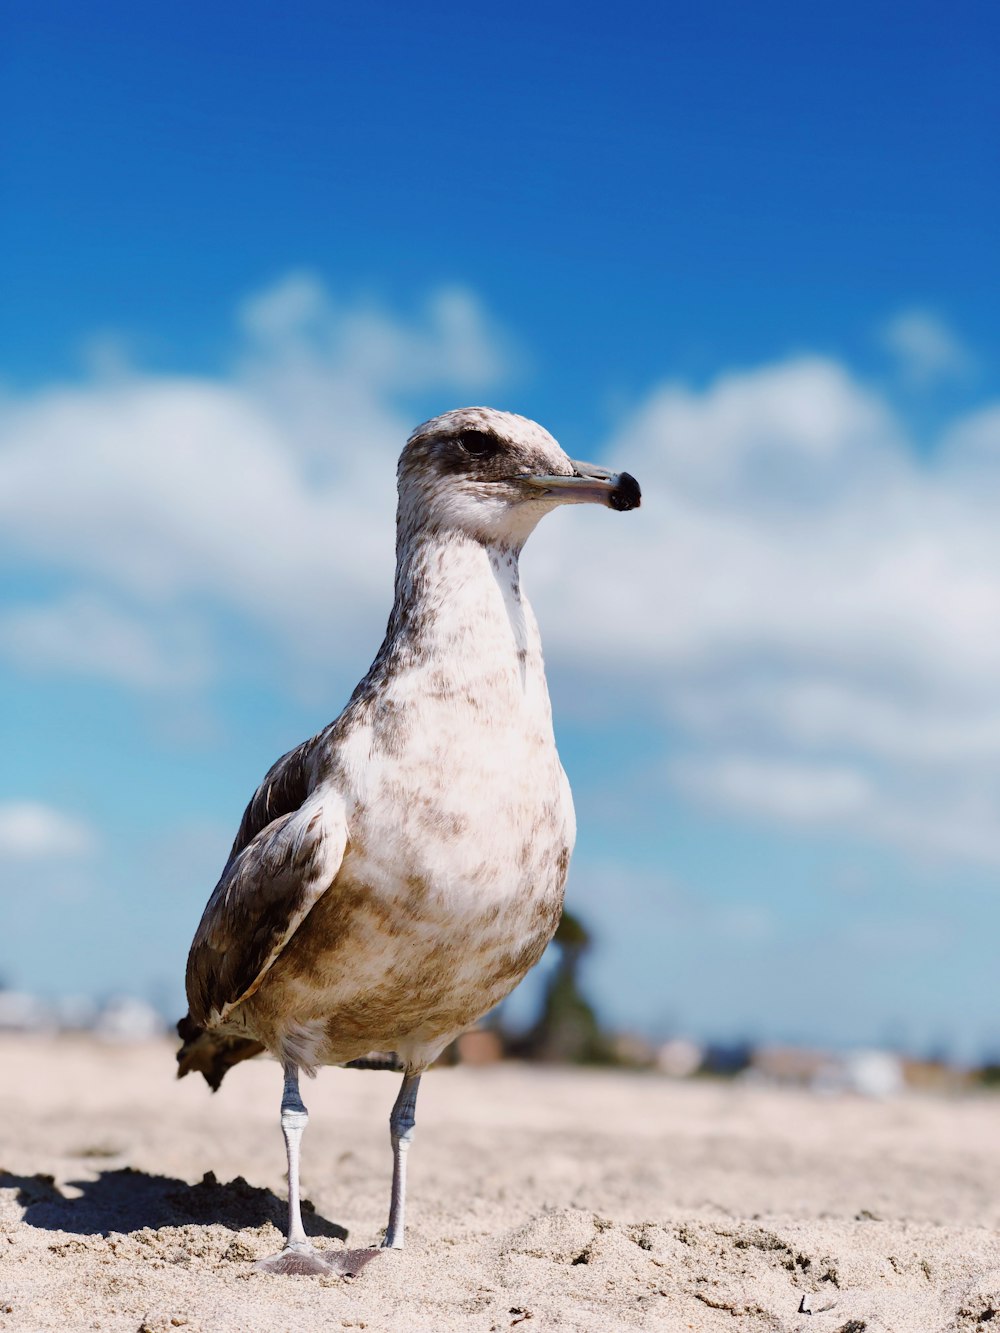 white and brown bird standing on beach sand